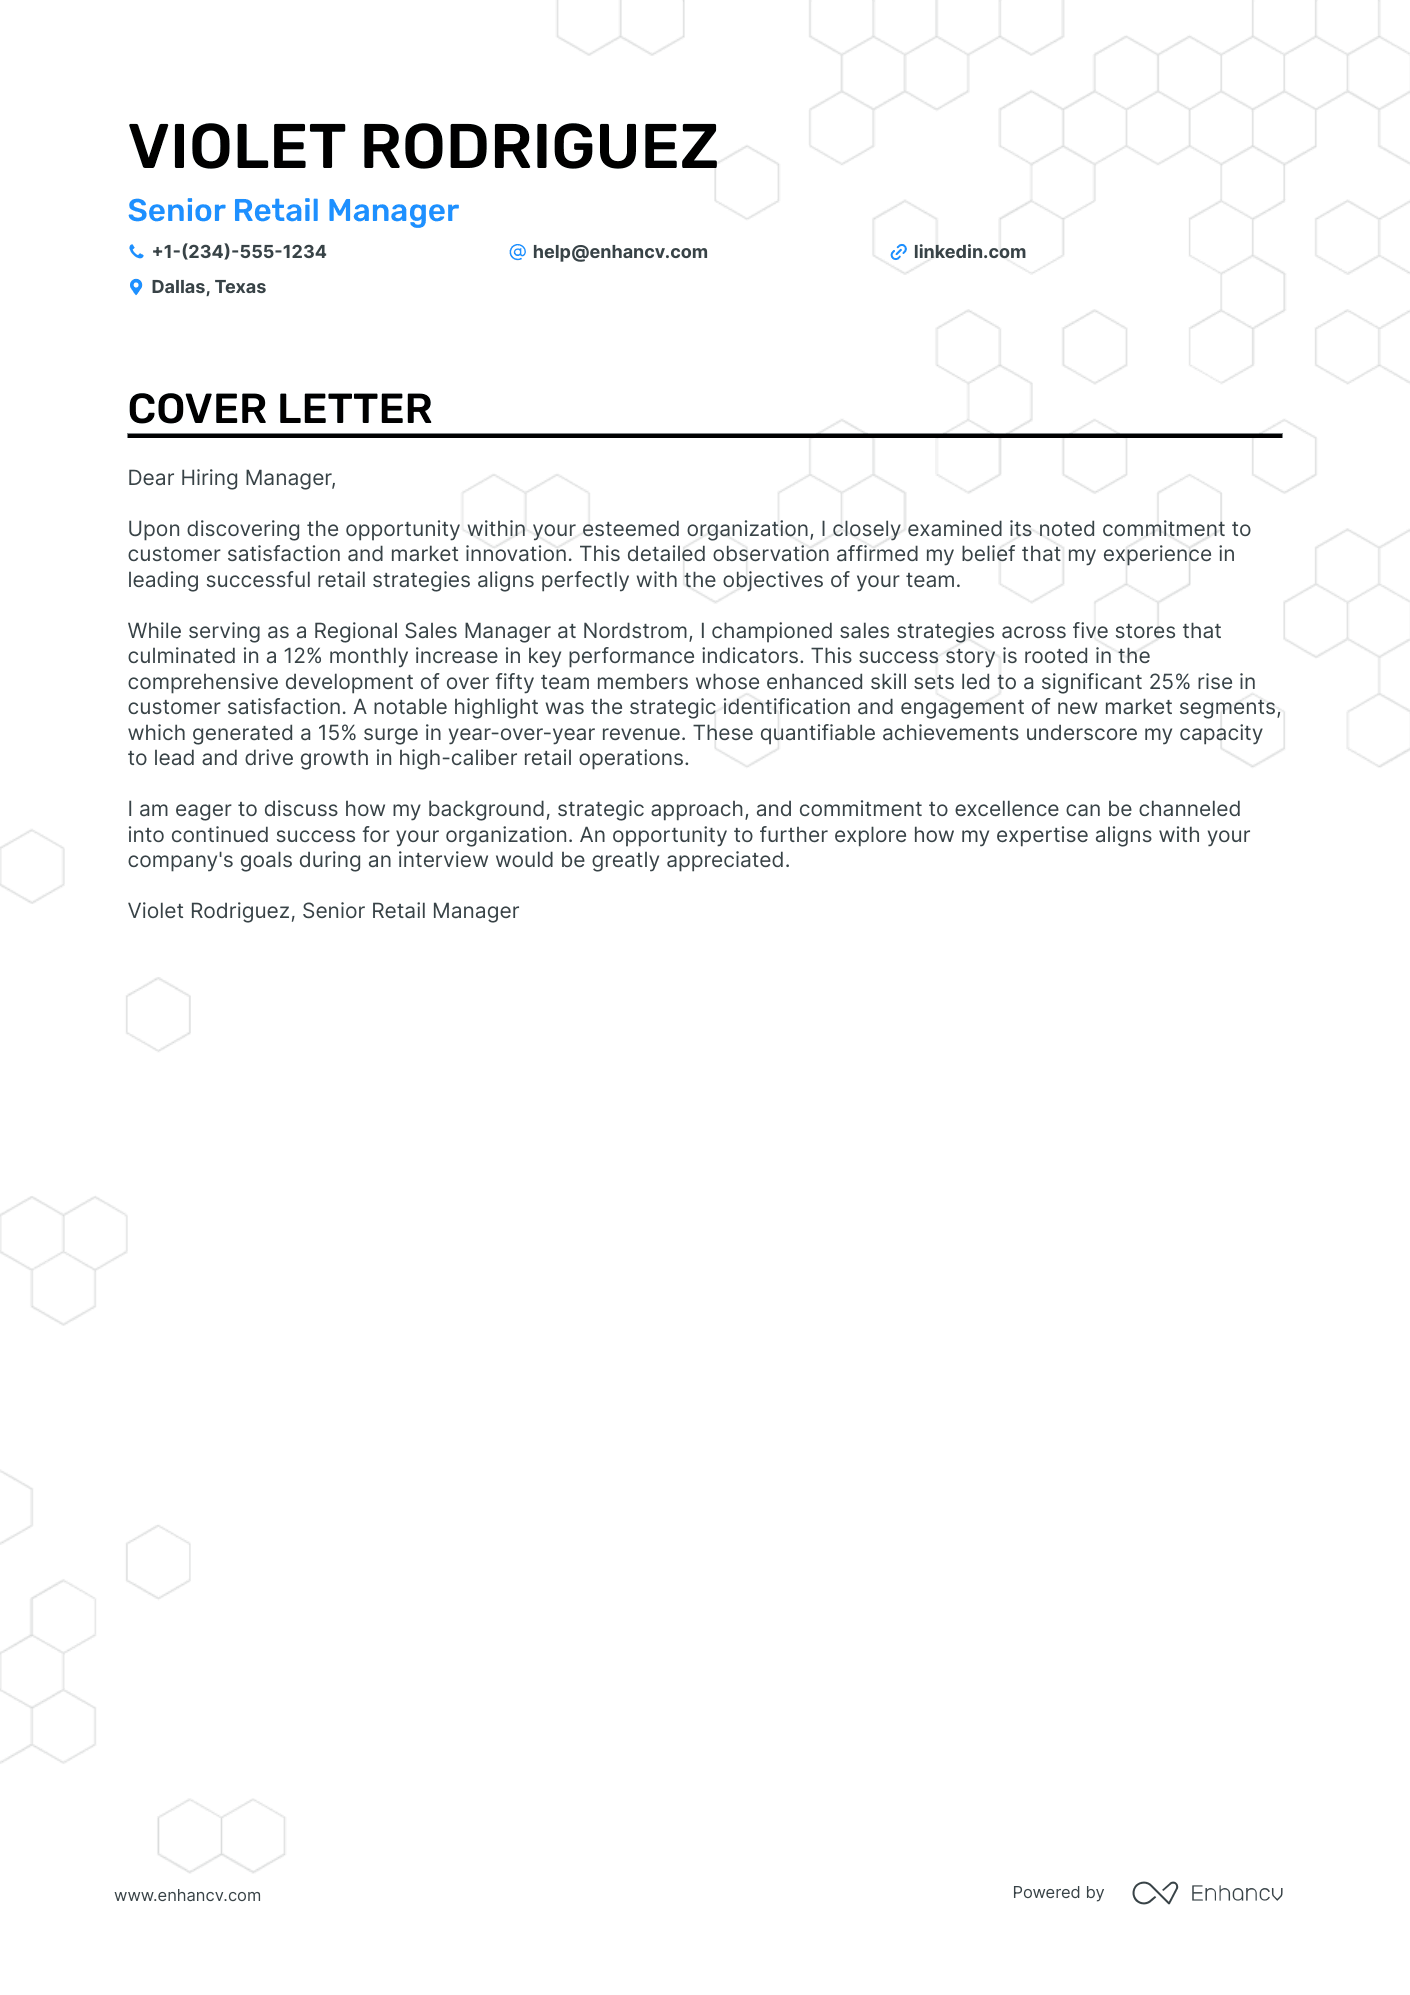 Customer Experience Manager cover letter